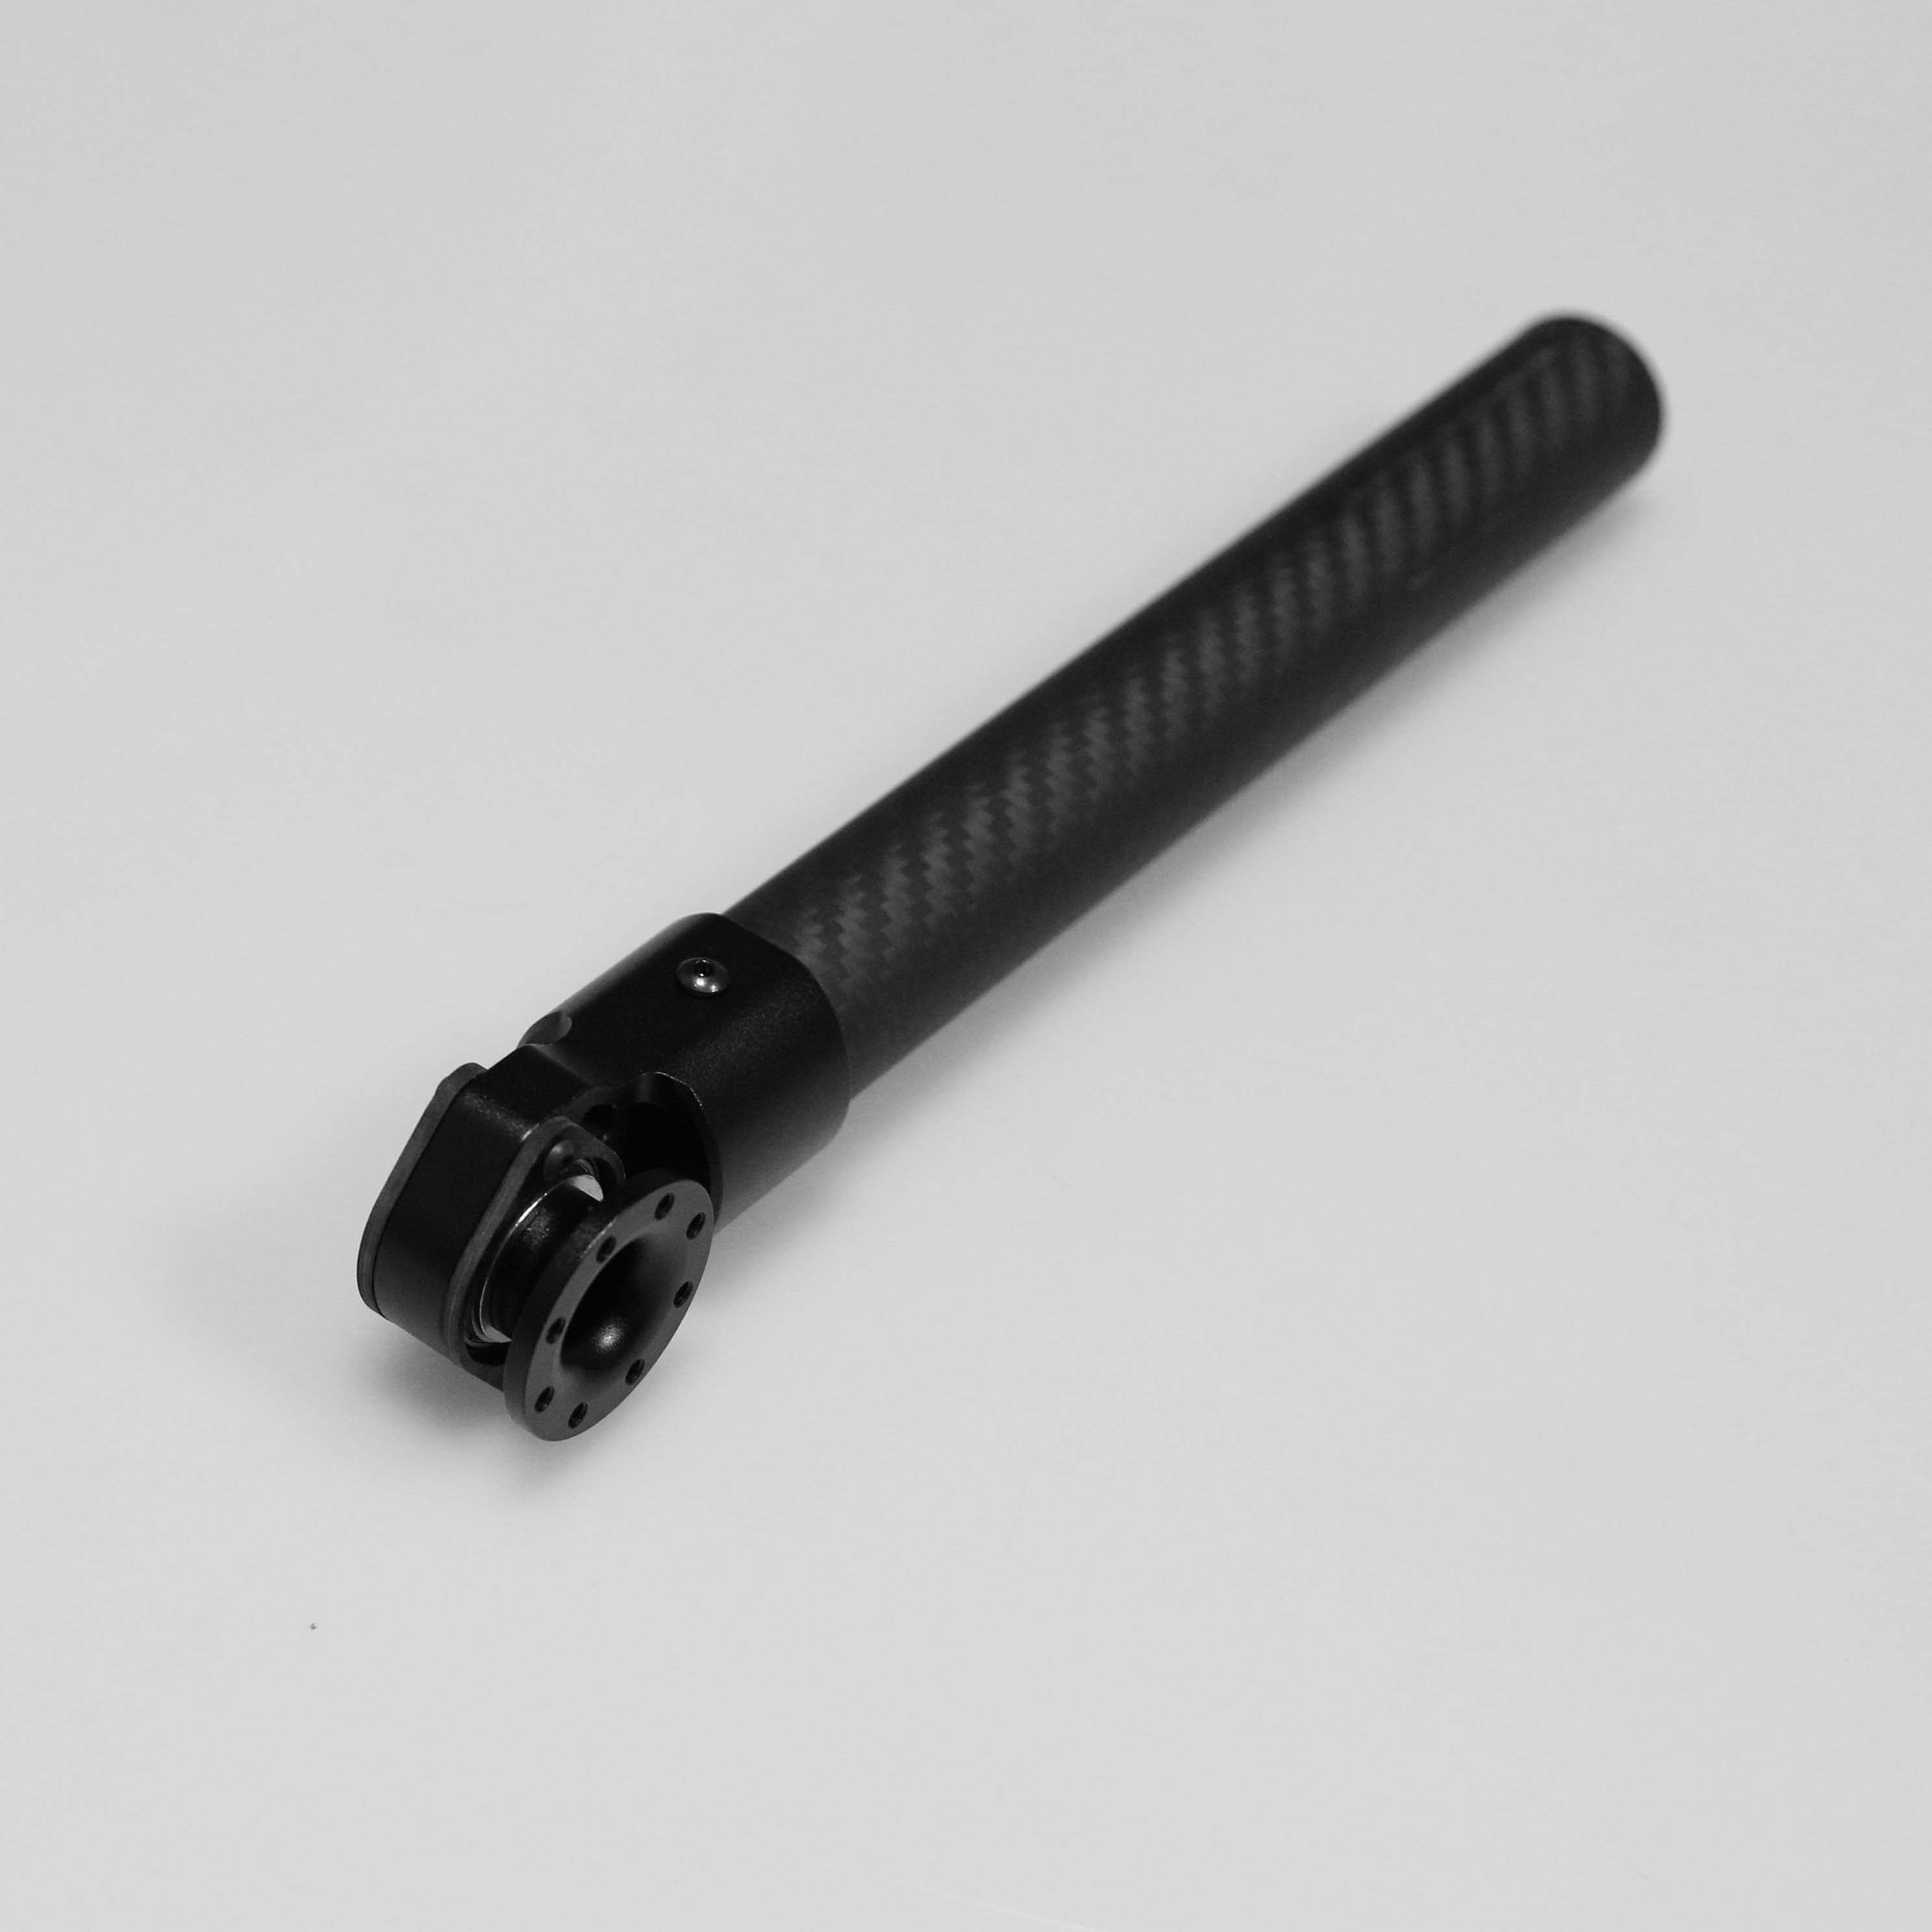 Aluminum connector on the tilt pitch axis for BG003 pro gimbal